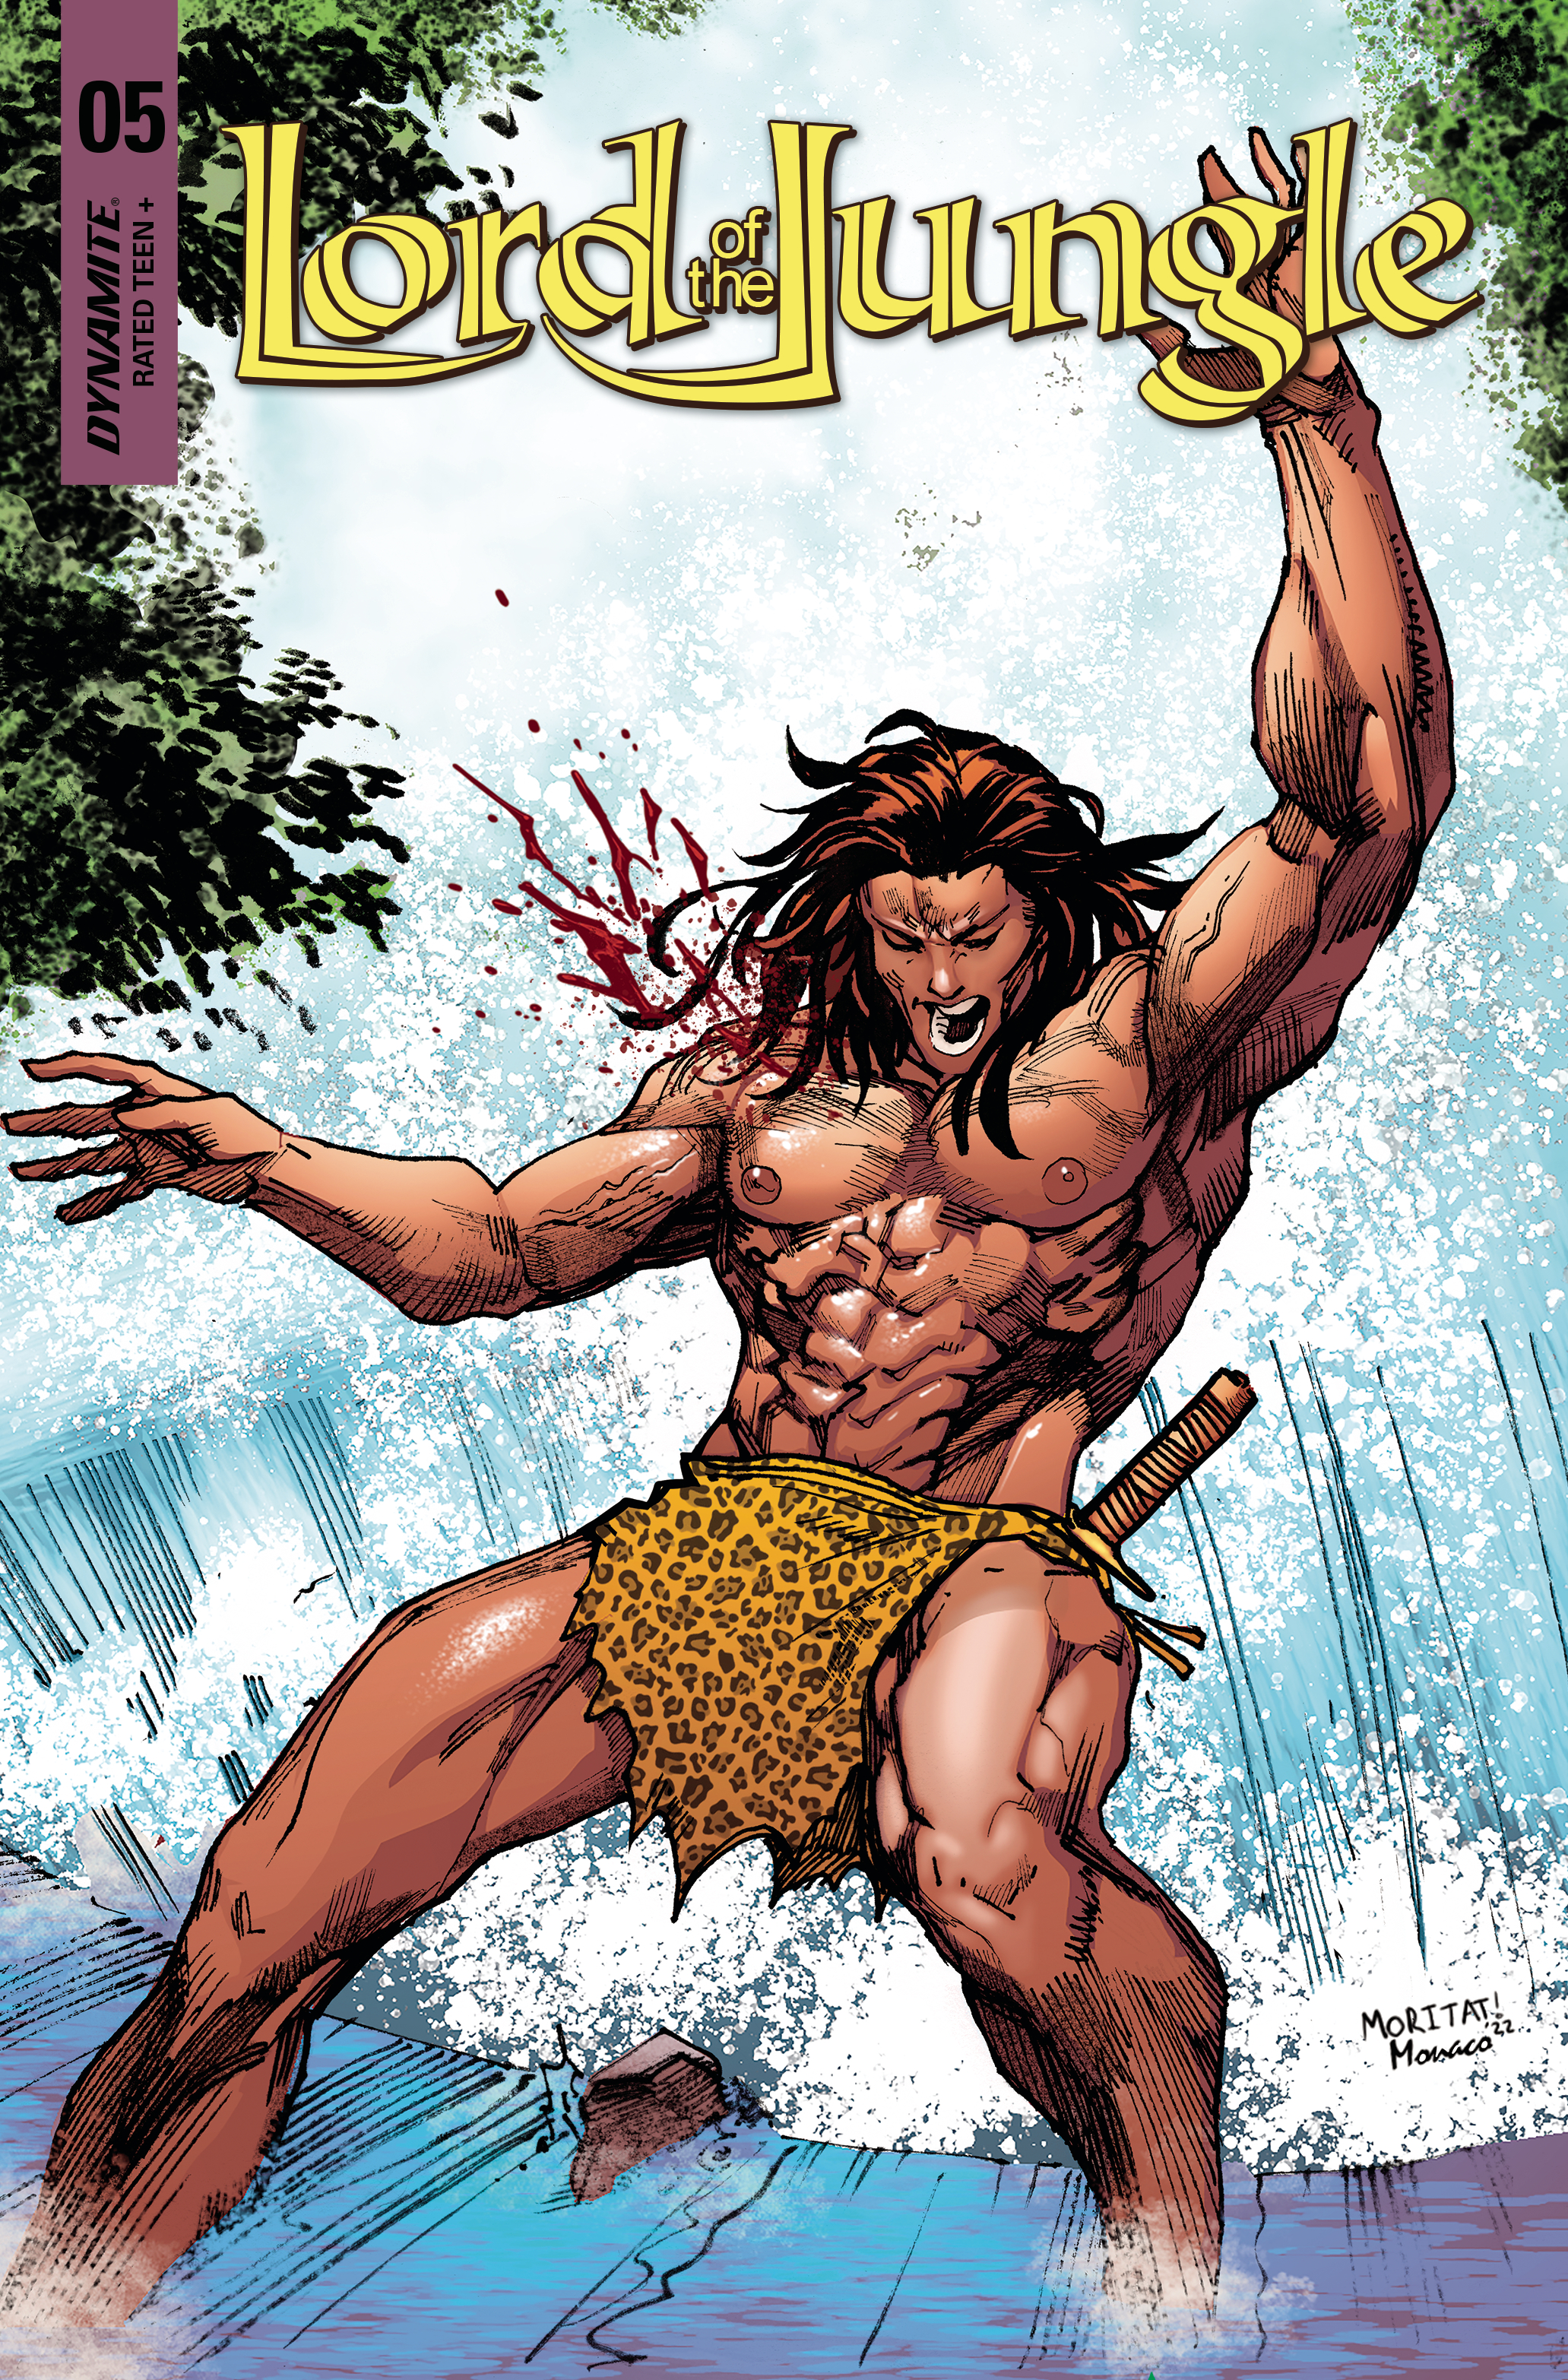 Lord of the Jungle #5 Cover D Moritat